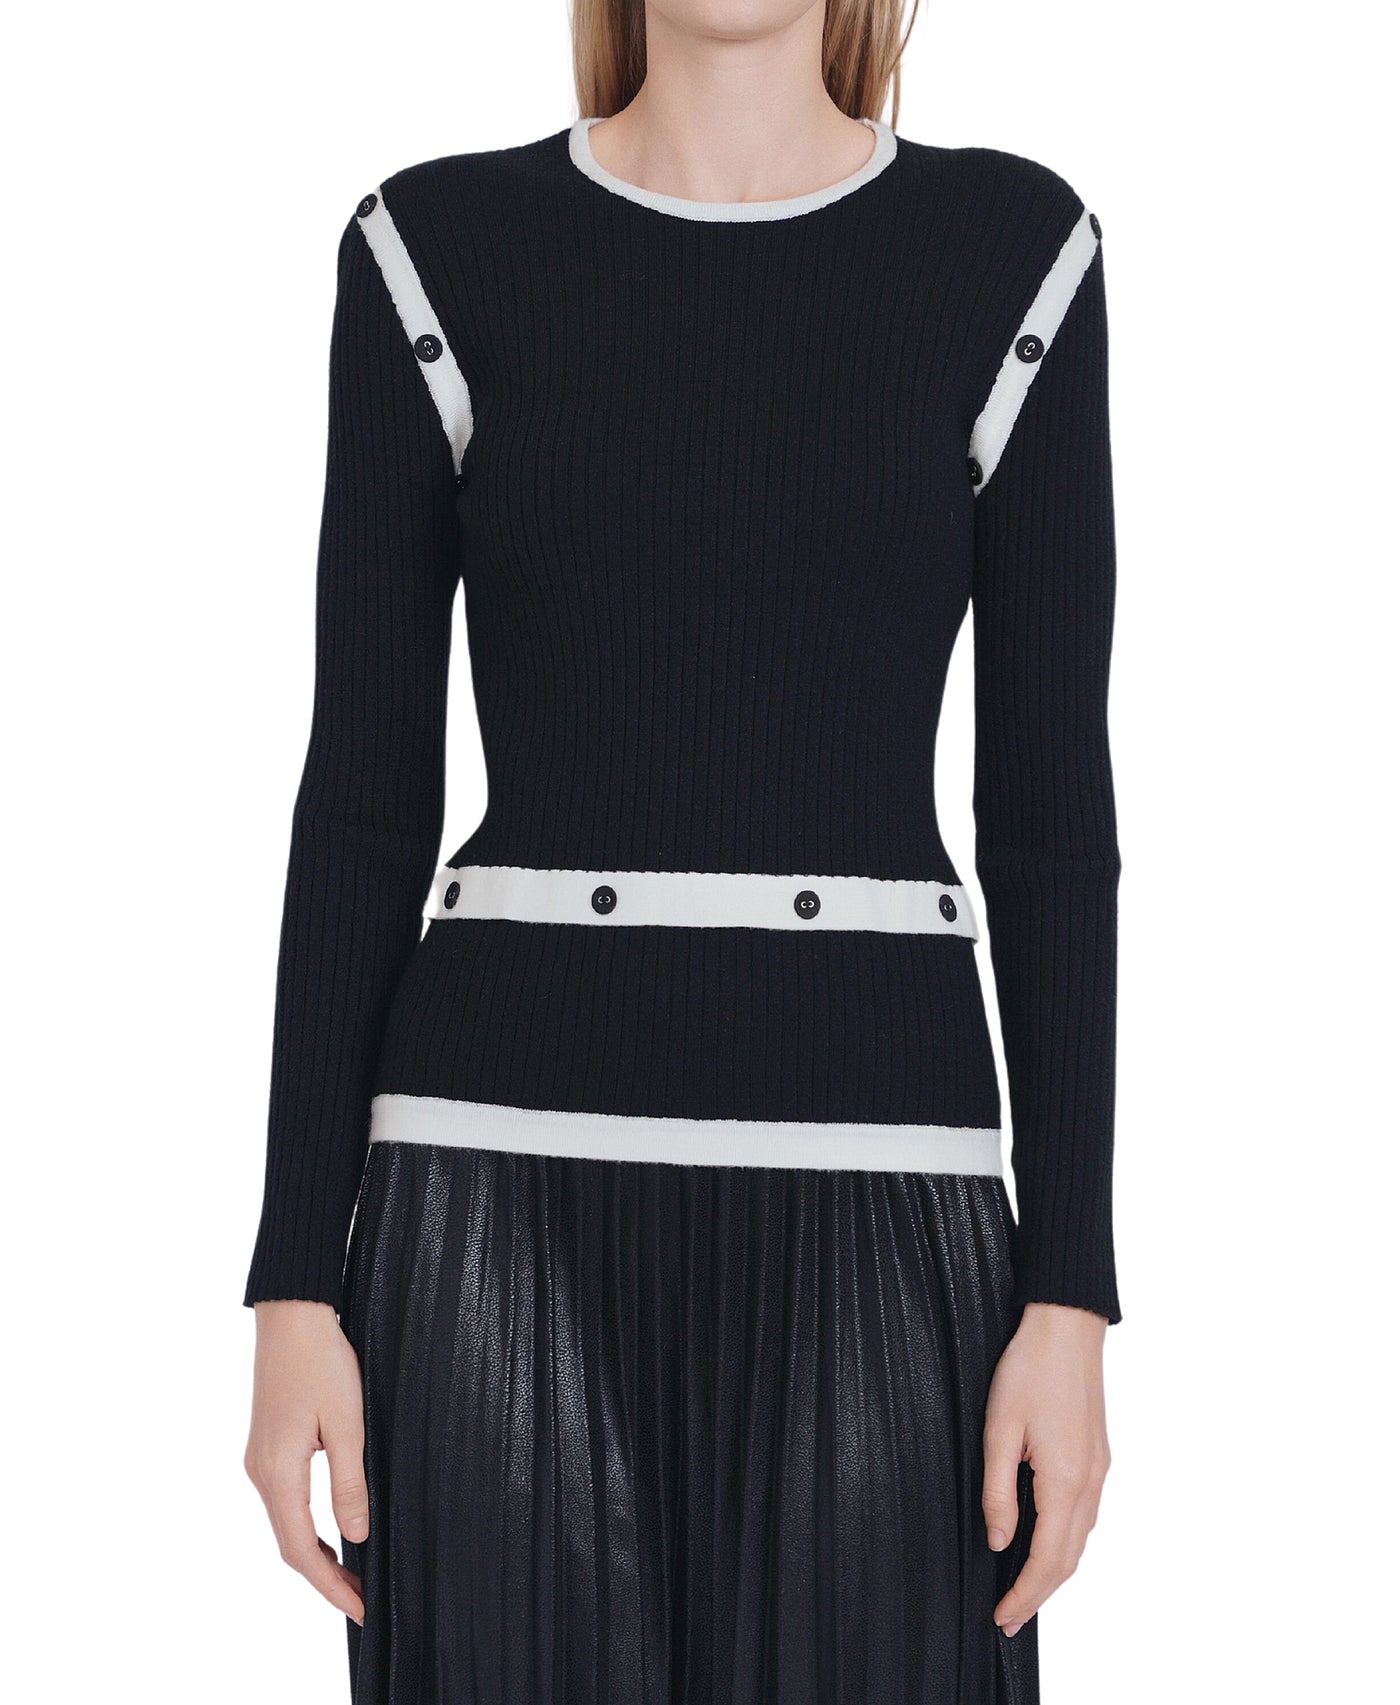 Ribbed Sweater w/ Button Accents image 1